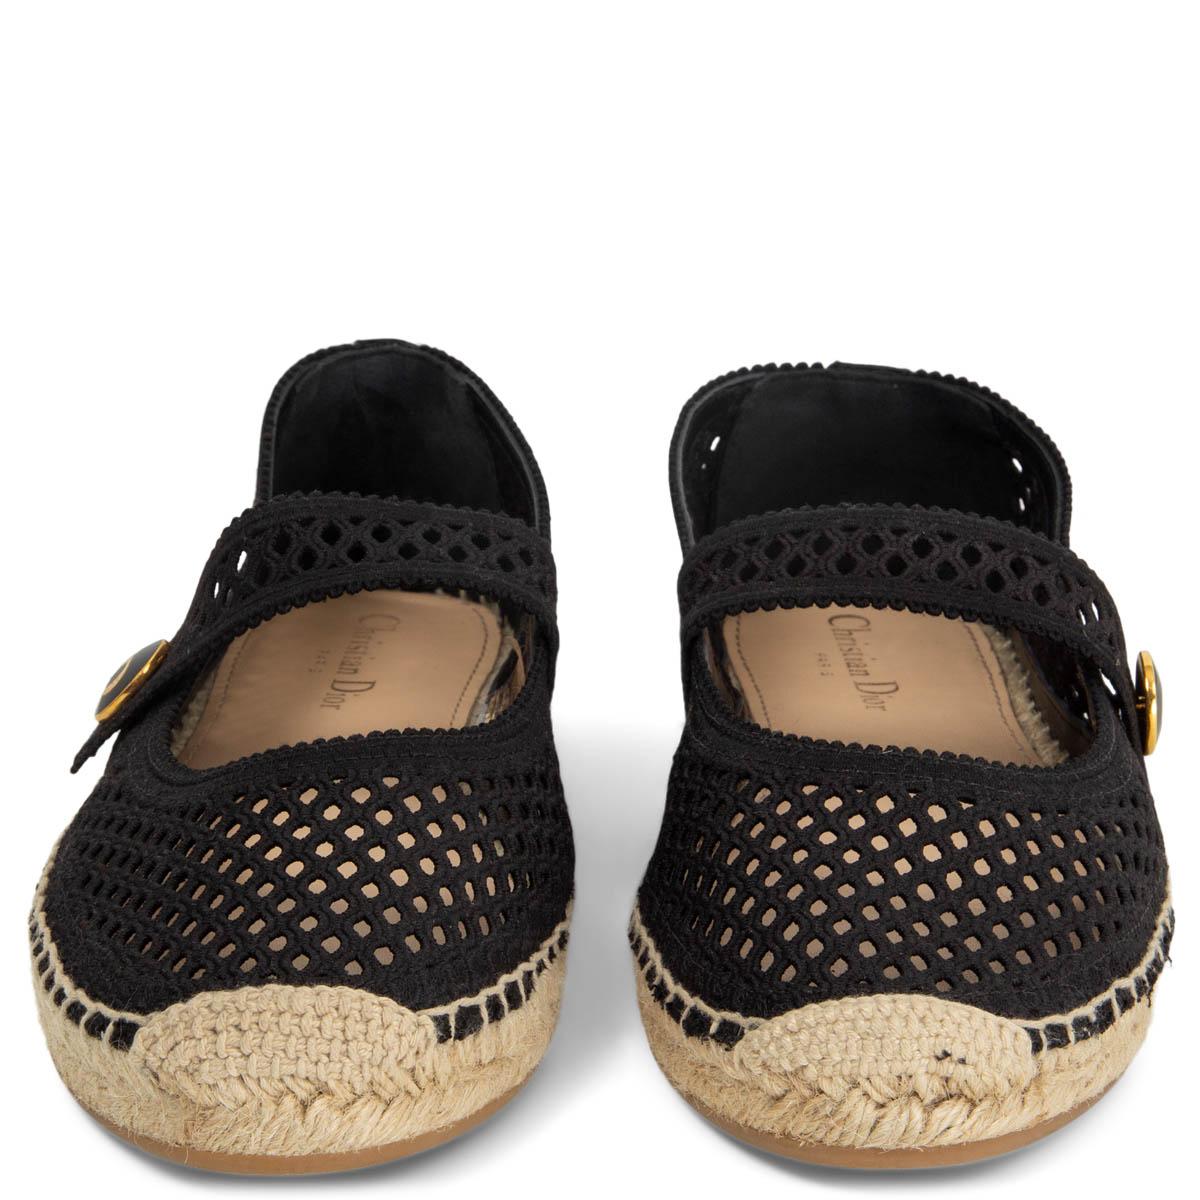 100% authentic Christian Dior Caro espadrilles in black mesh-like embroidered cotton, it’s embellished with a strap that features a non-removable button with the CD logo. The soles are handmade and crafted in traditional way with rope and feature a